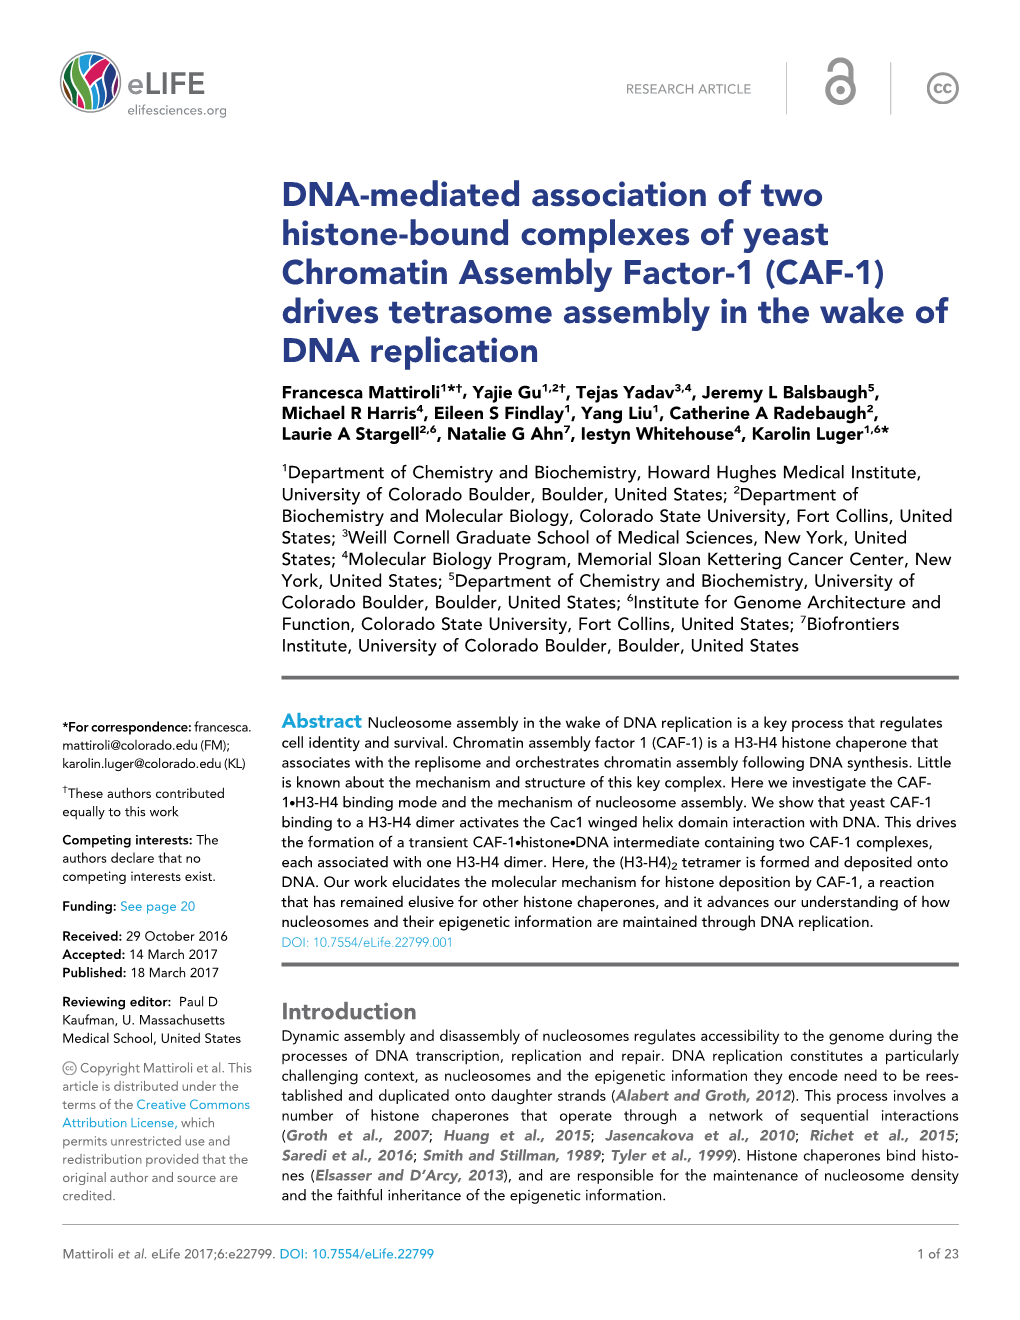 DNA-Mediated Association of Two Histone-Bound